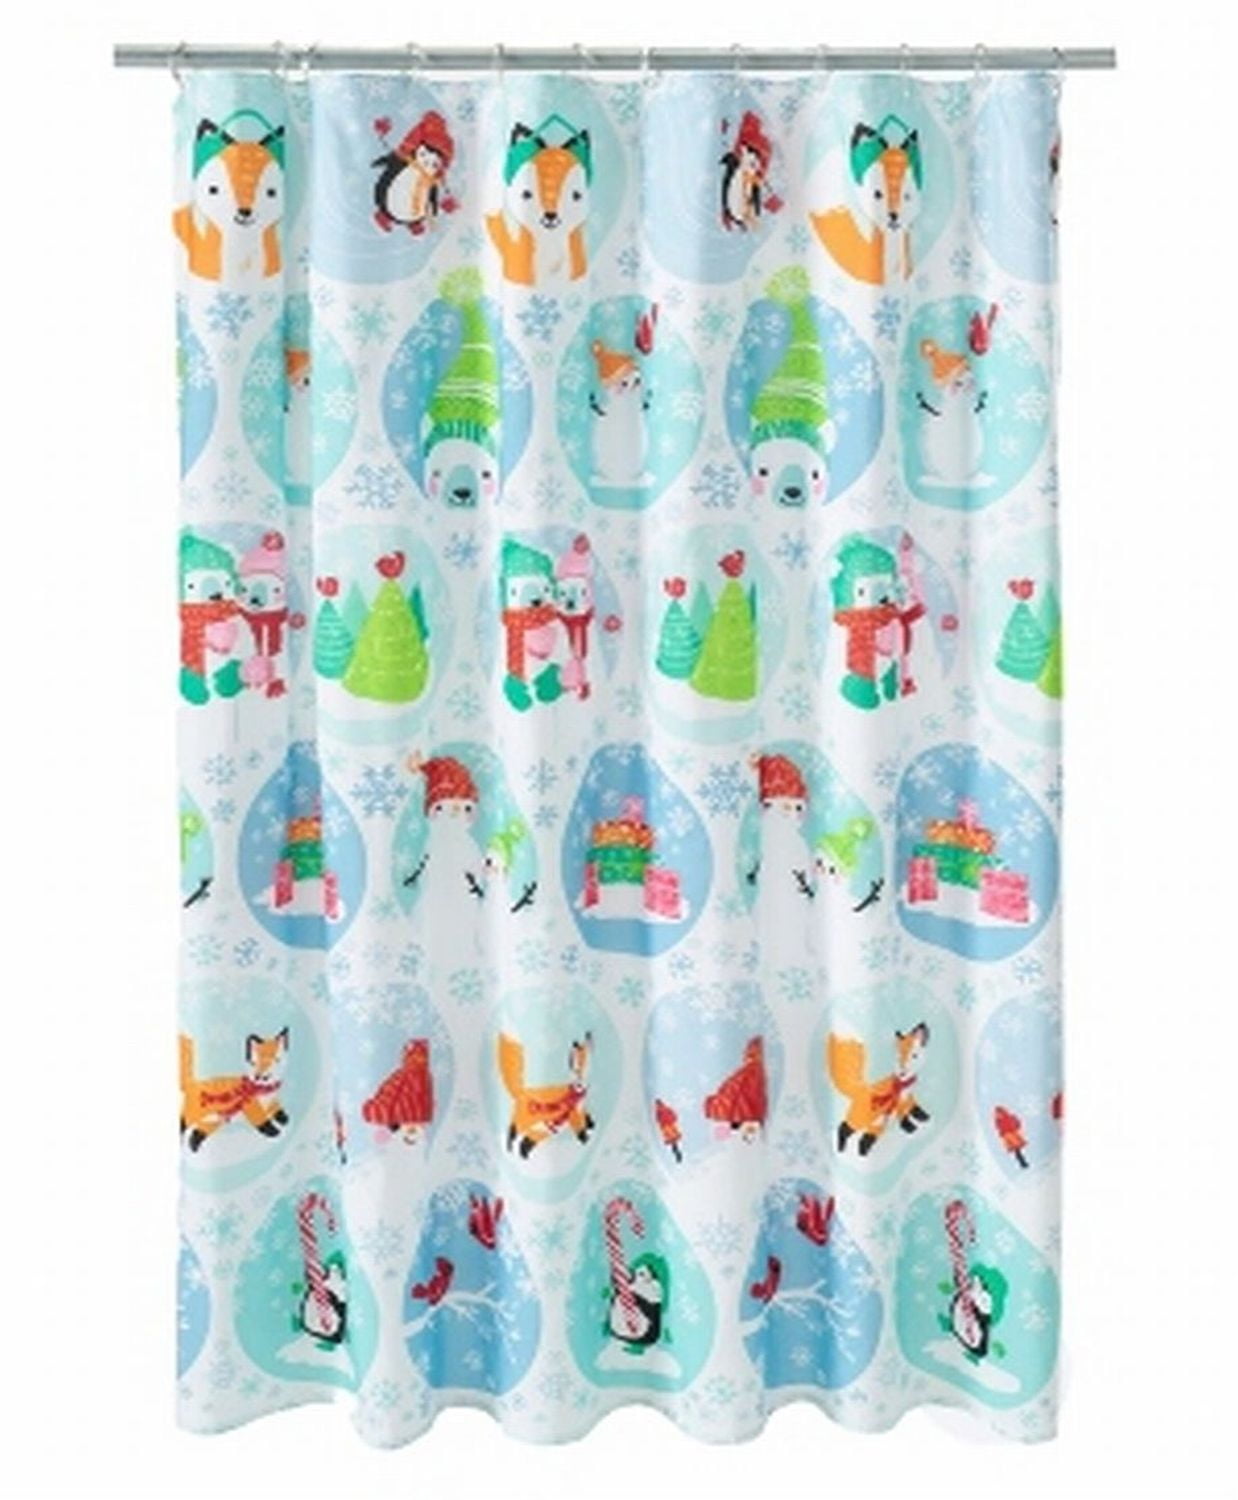 NEW "Oh What Fun" Fabric Shower Curtain Penguins Xmas Trees Christmas Holiday 